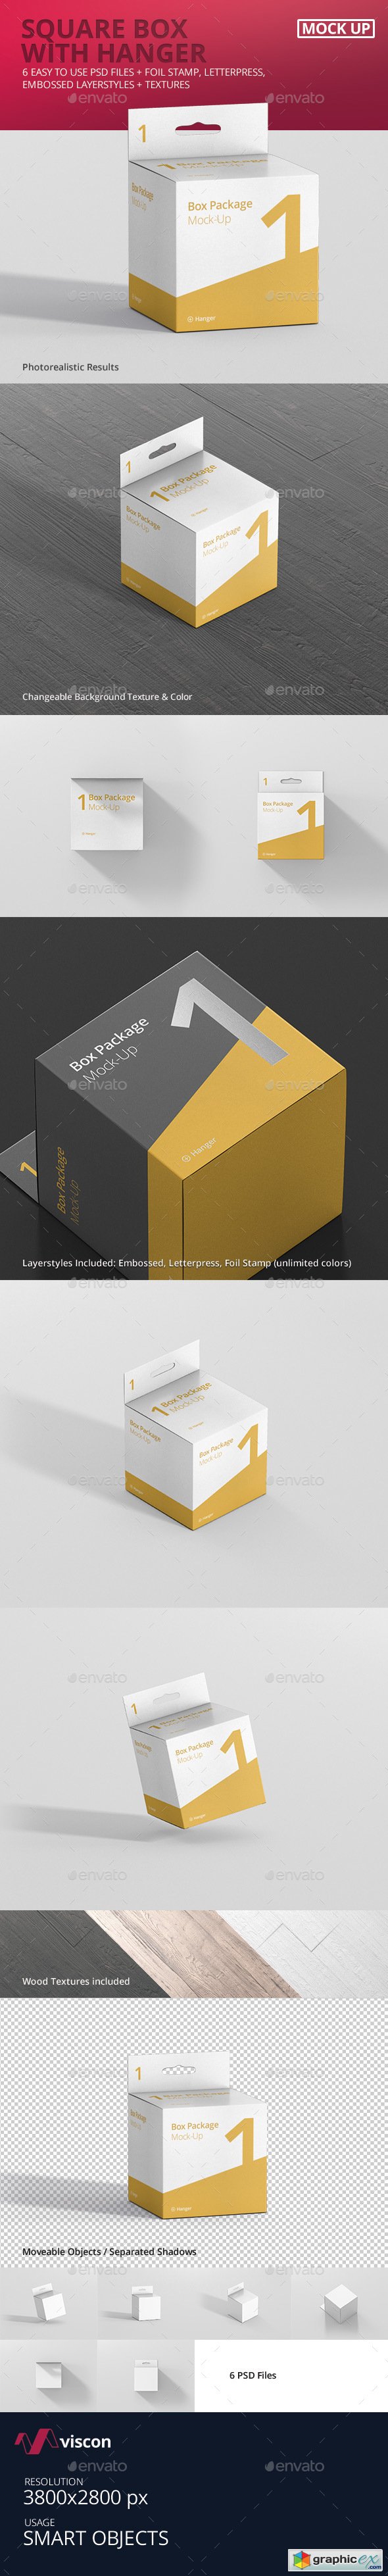 Package Box Mock-Up - Square with Hanger